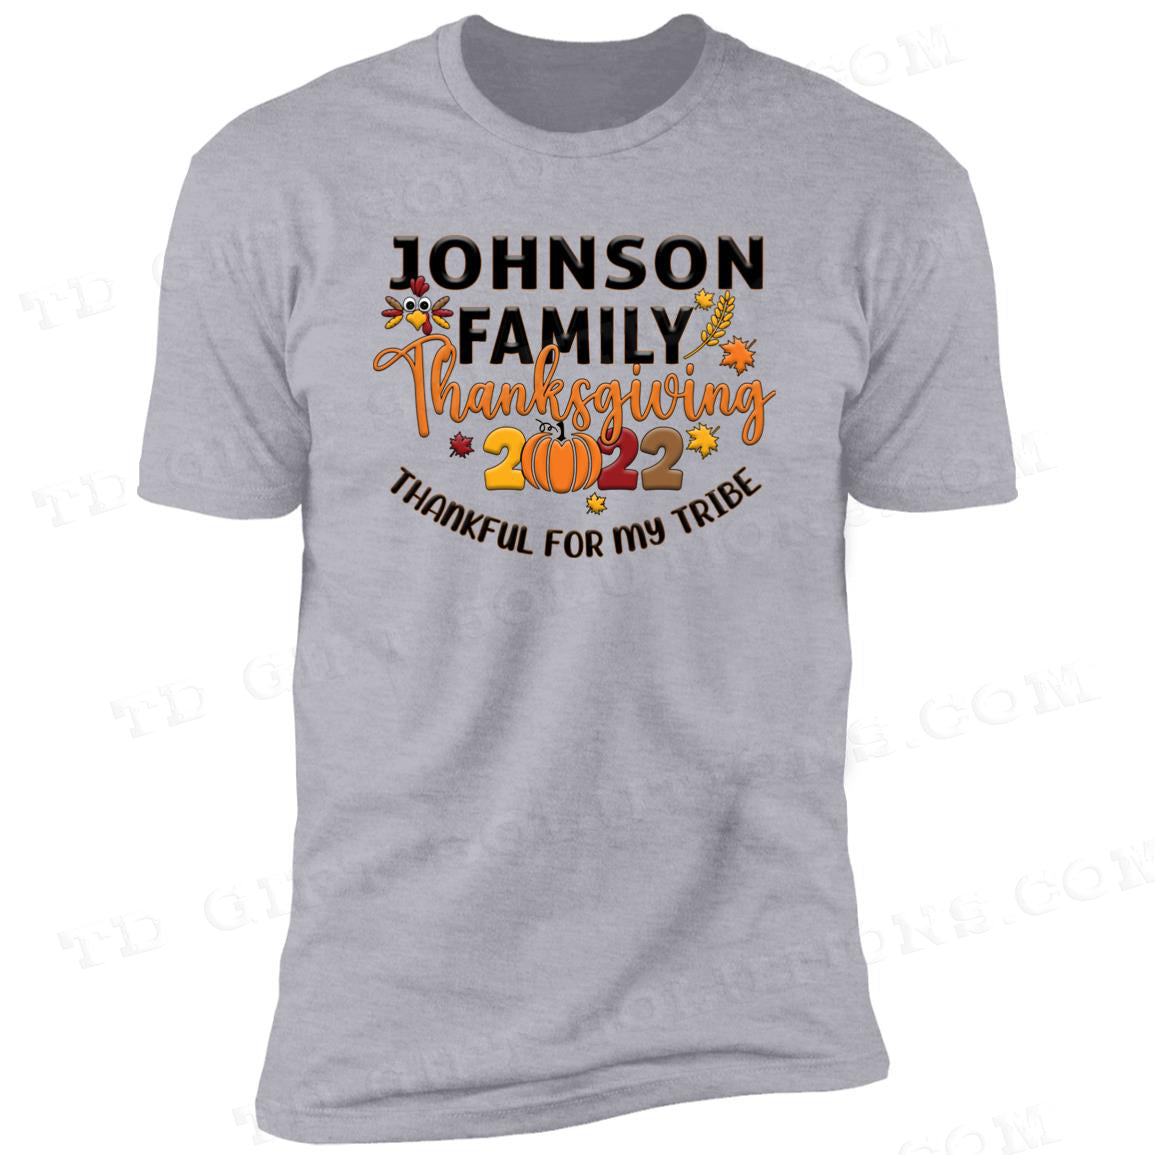 Personalized Matching Thankful For My Tribe Family T-Shirts-TD Gift Solutions.com